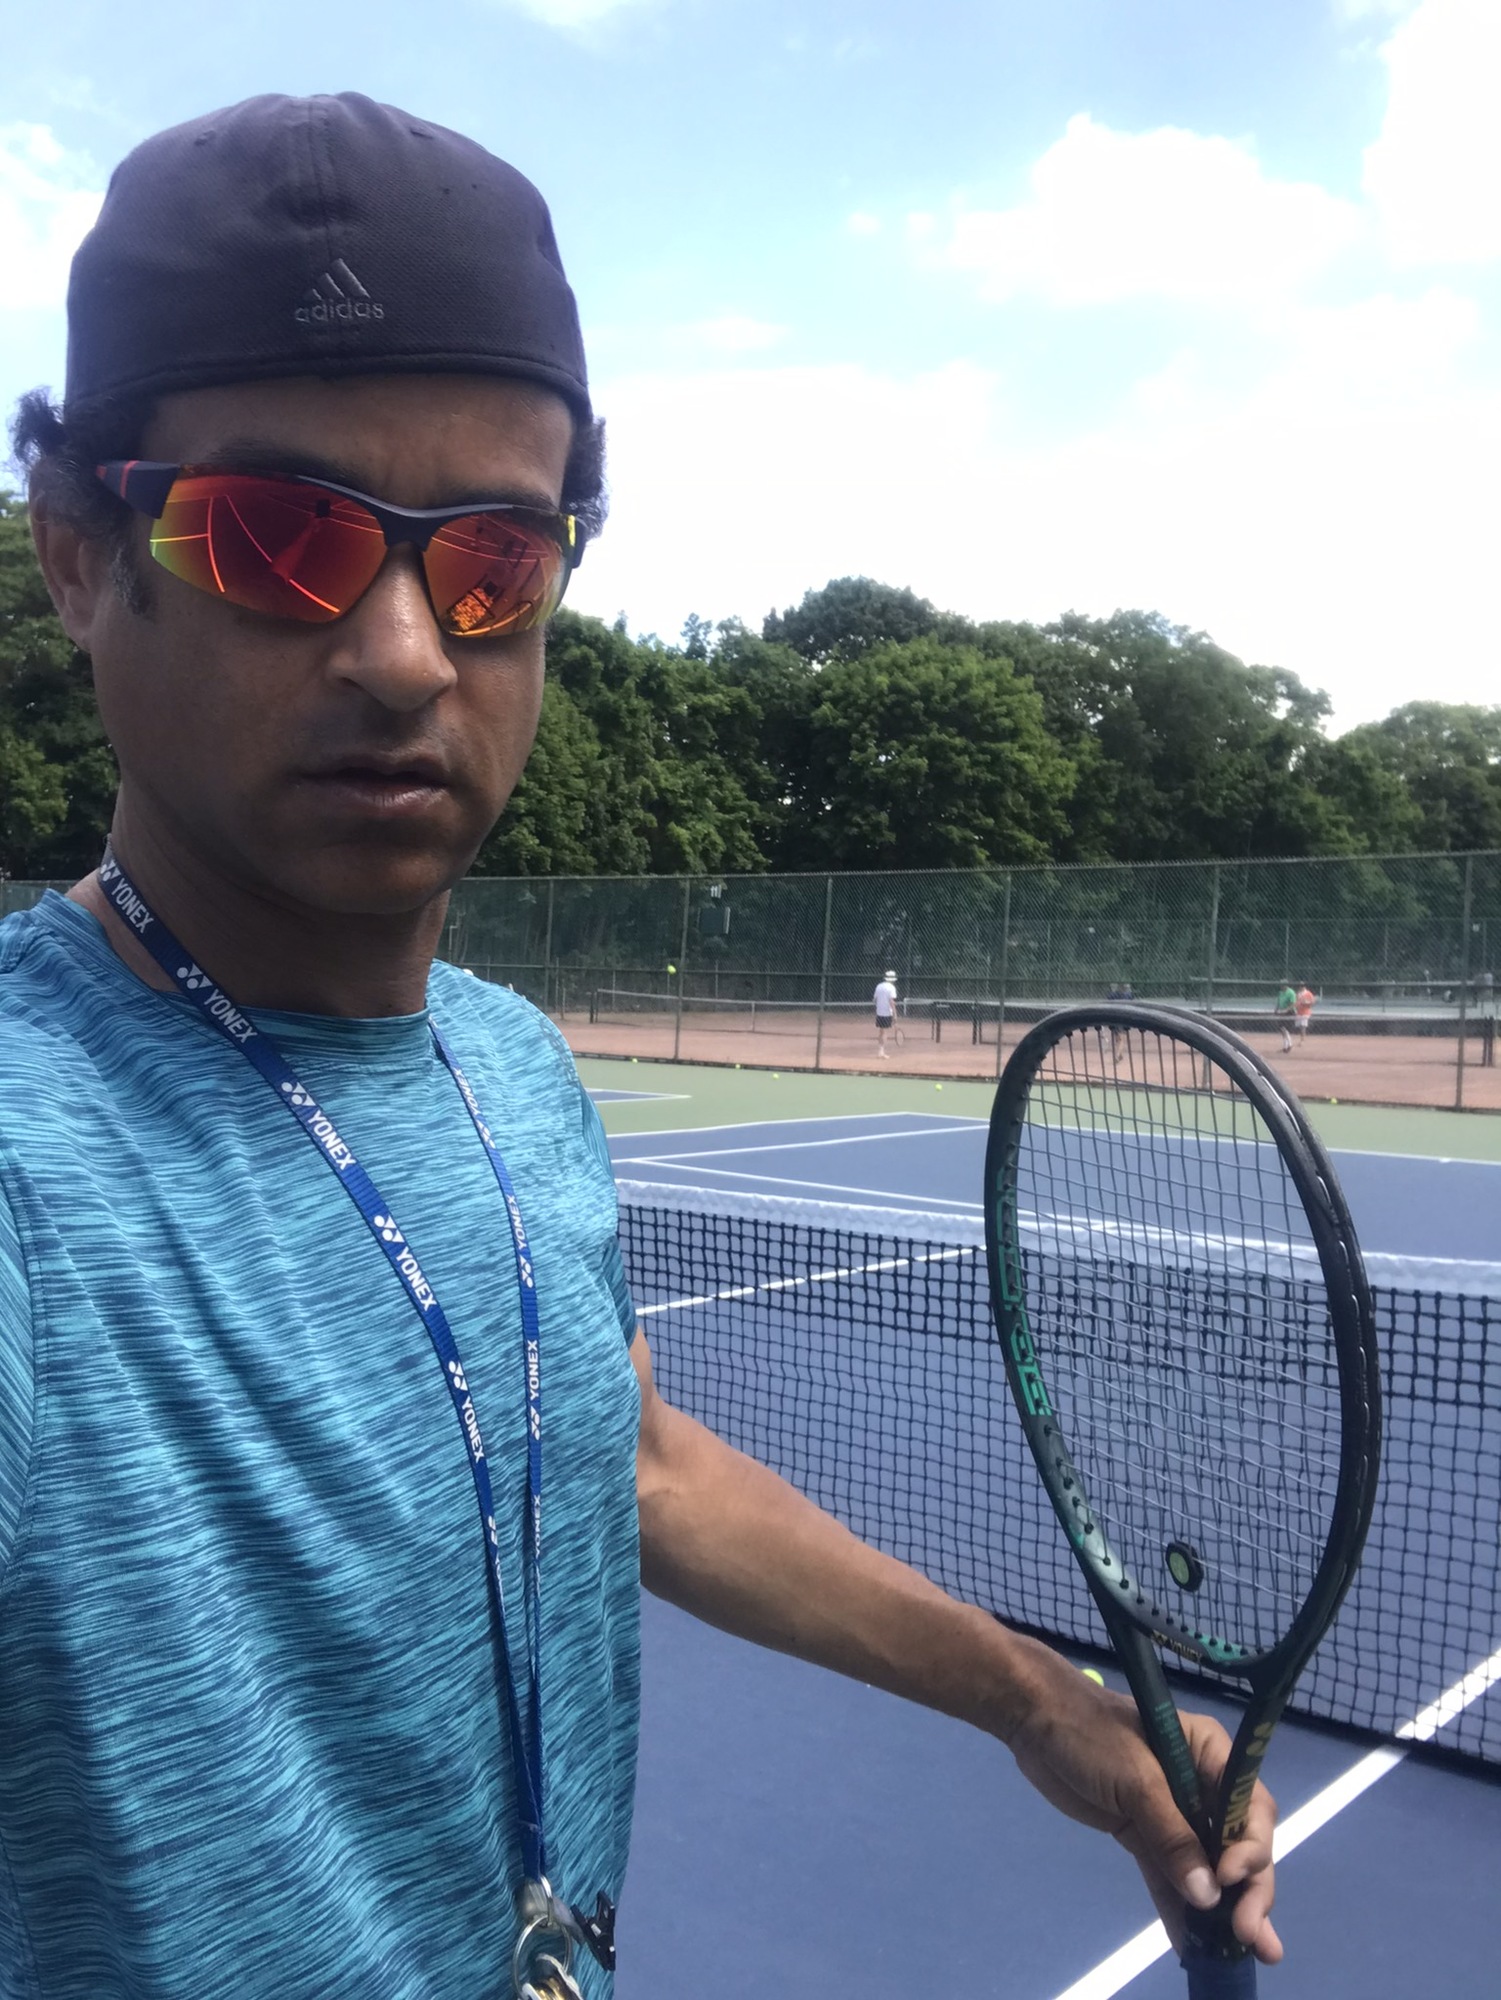 Justin S. teaches tennis lessons in Rego Park, NY